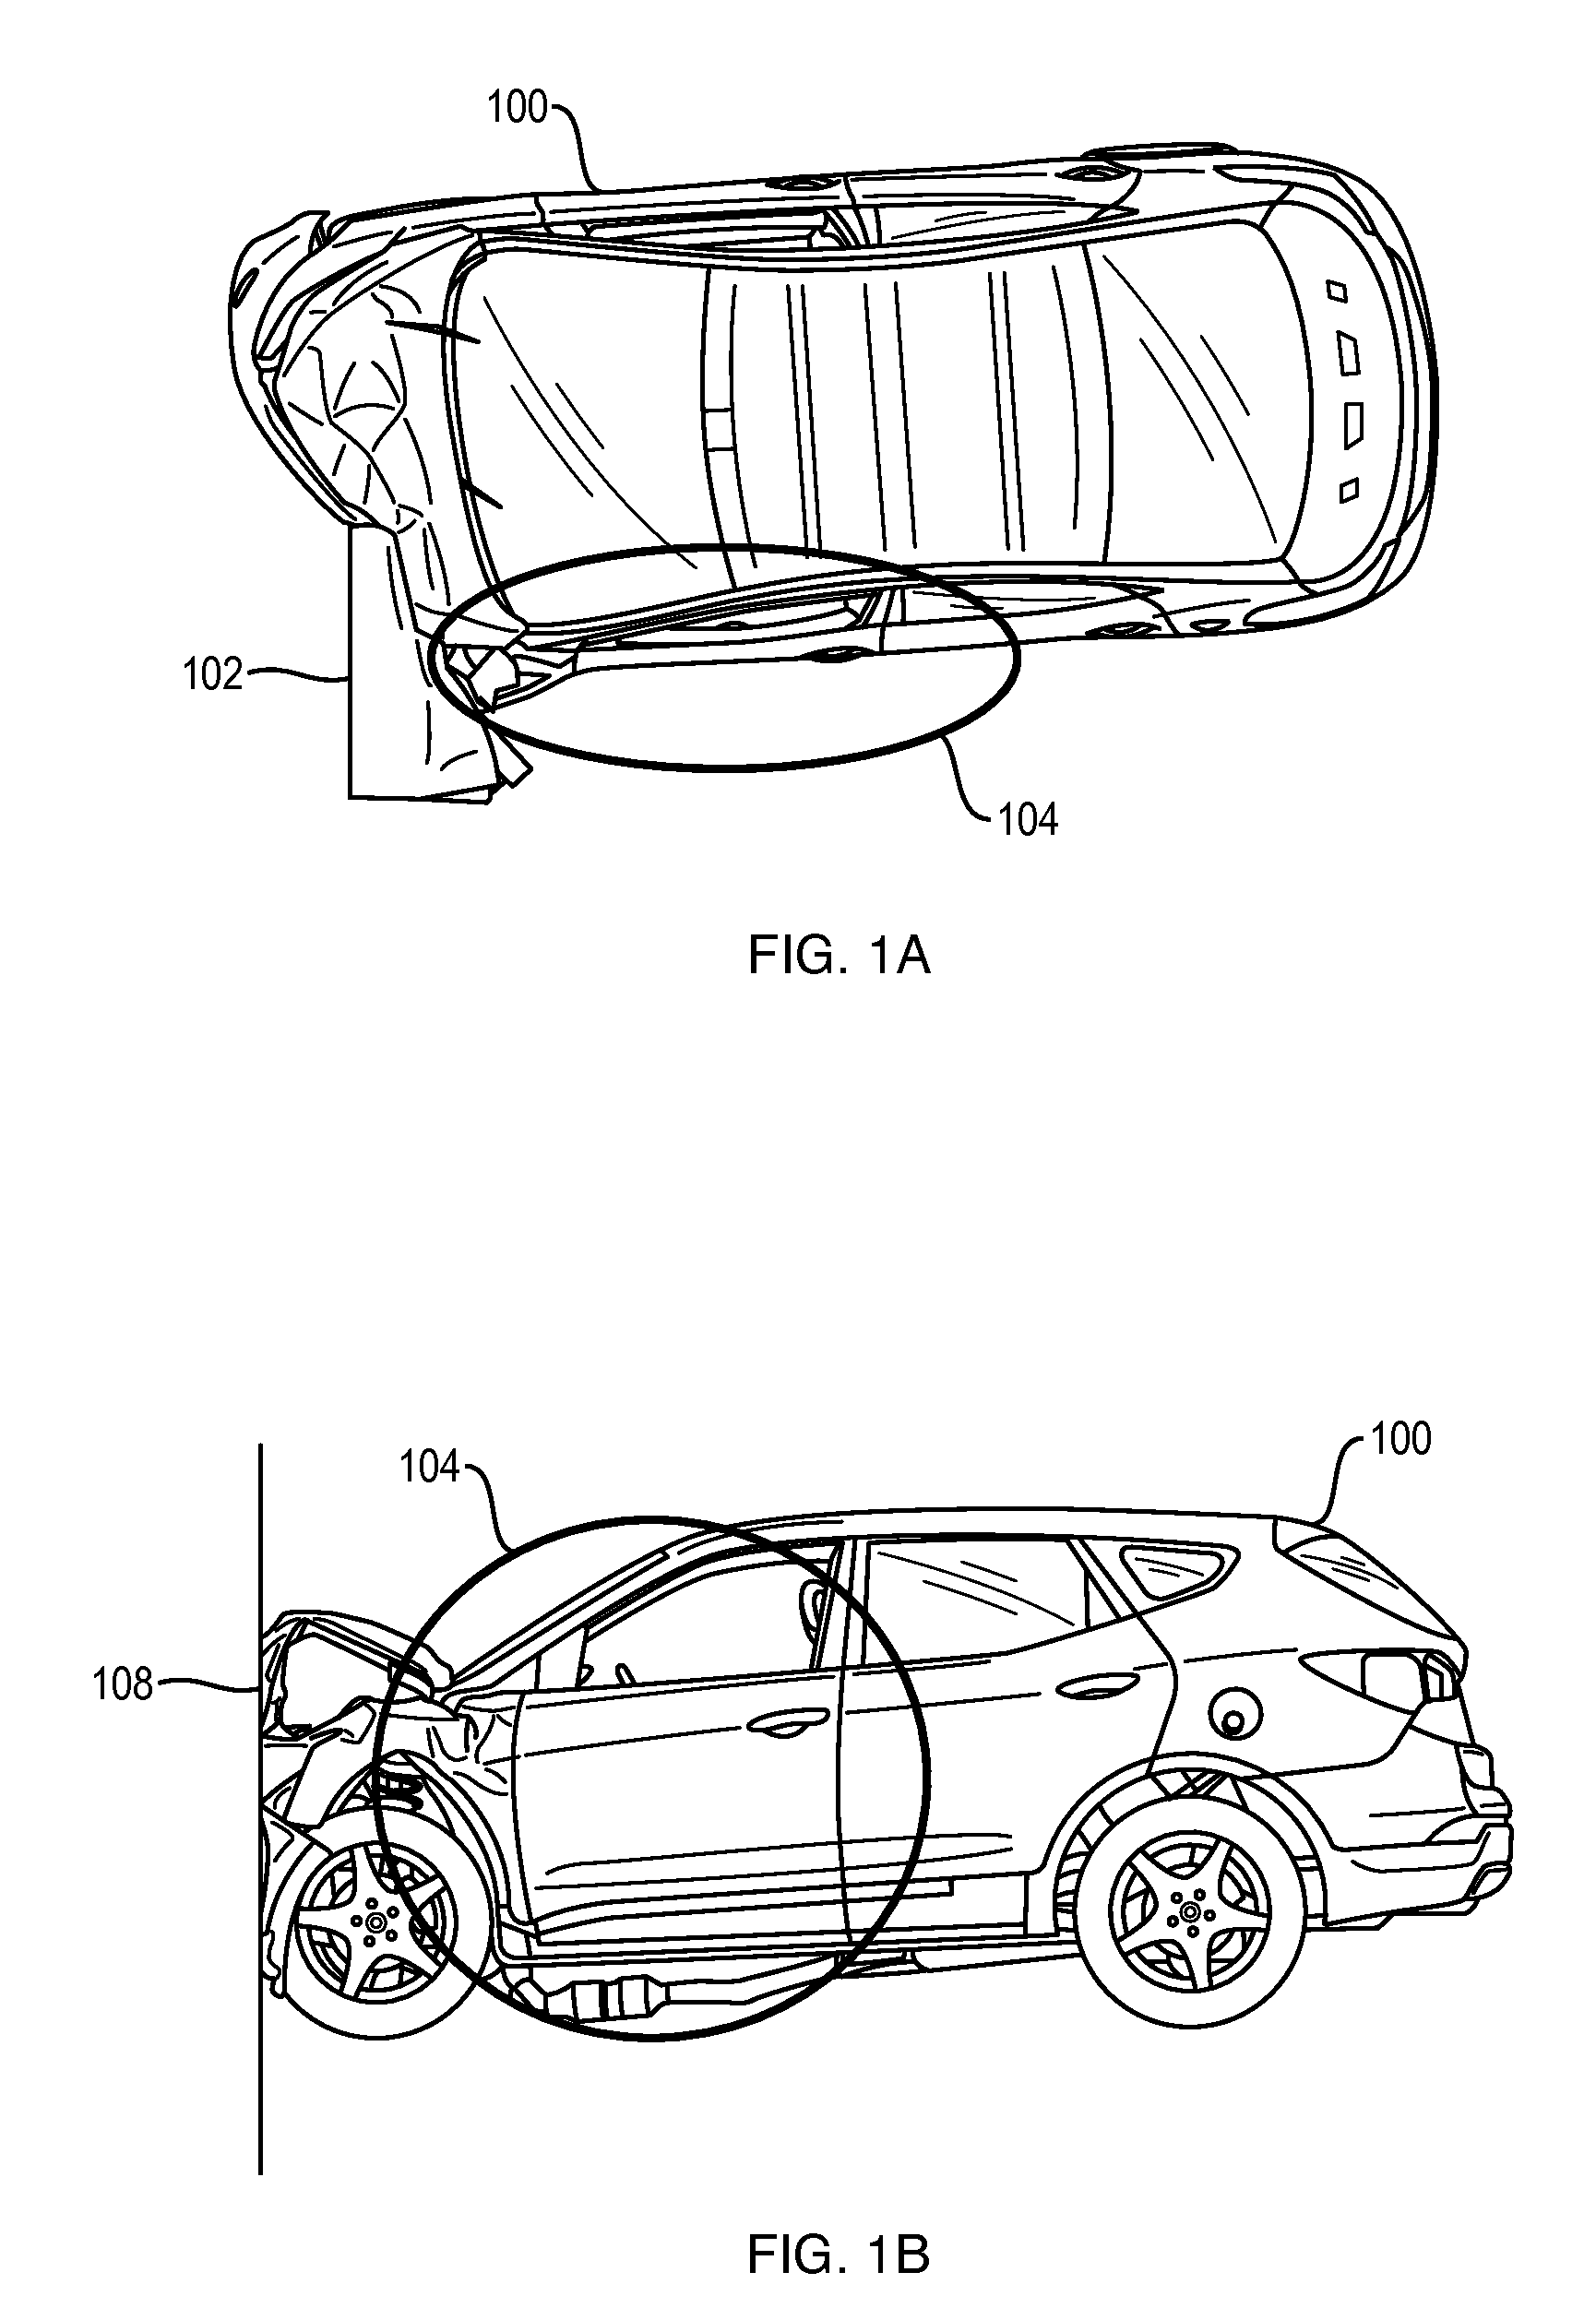 Vehicle wheel twist system for small overlap frontal collisions